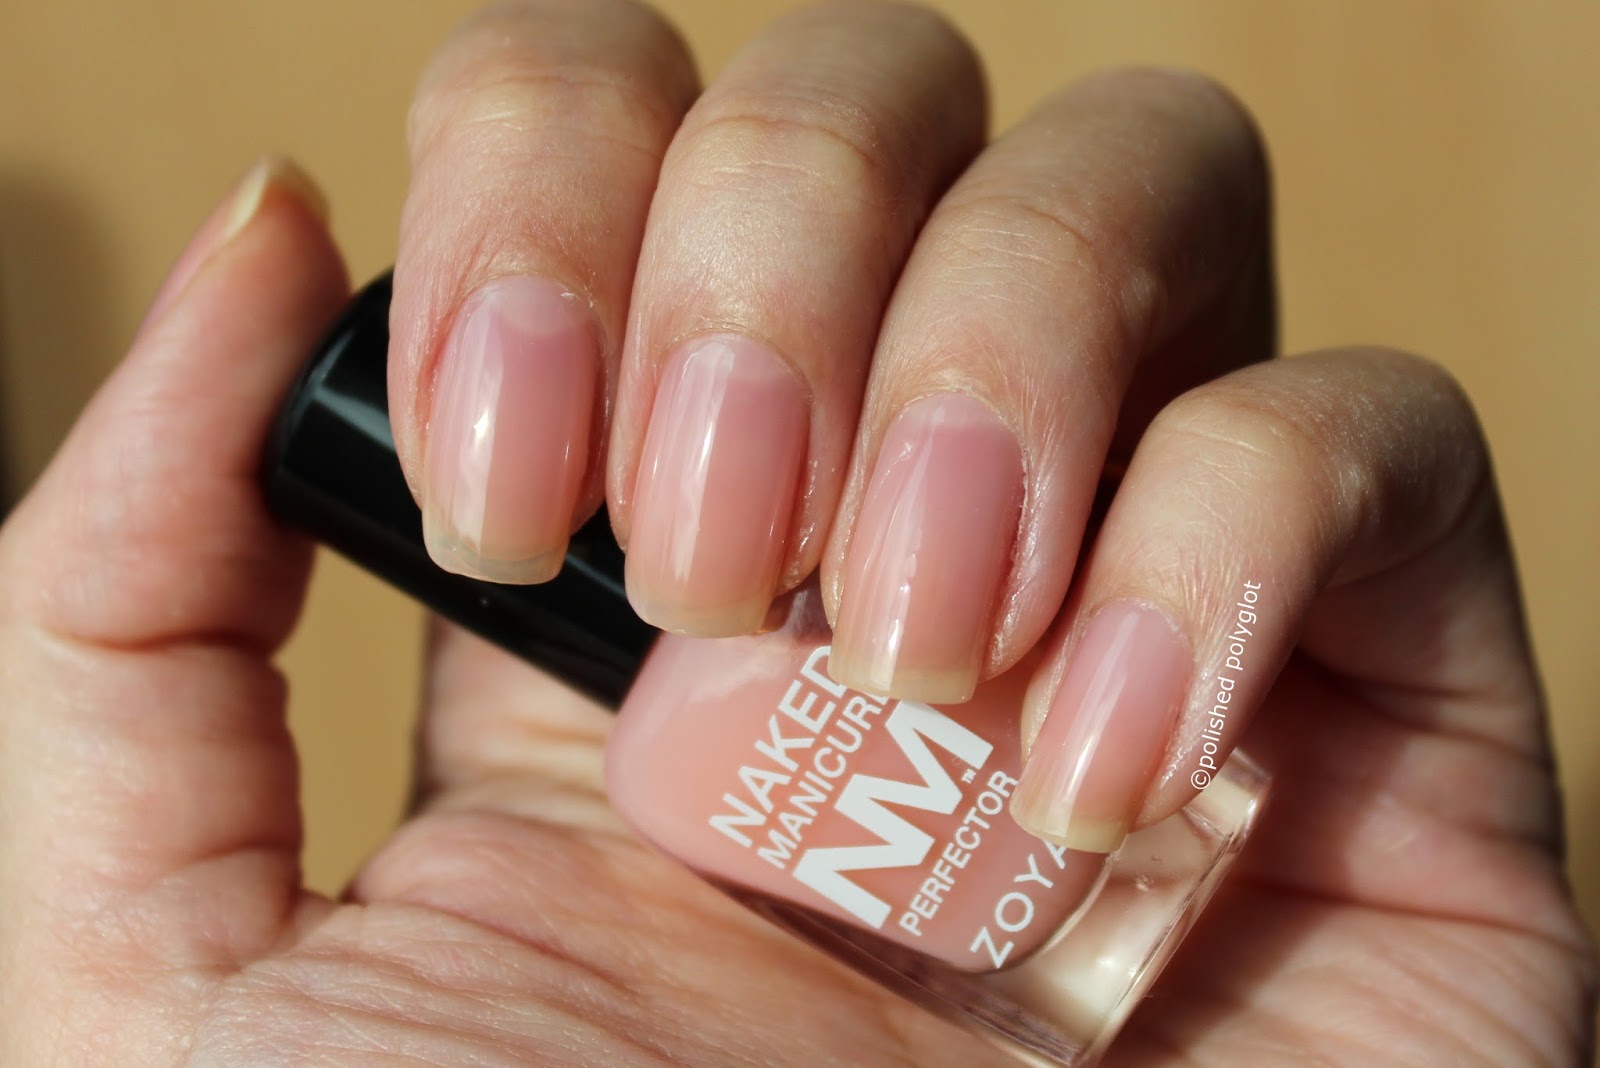 6. Zoya Nail Polish, Naked Manicure Perfector in Pink - wide 5